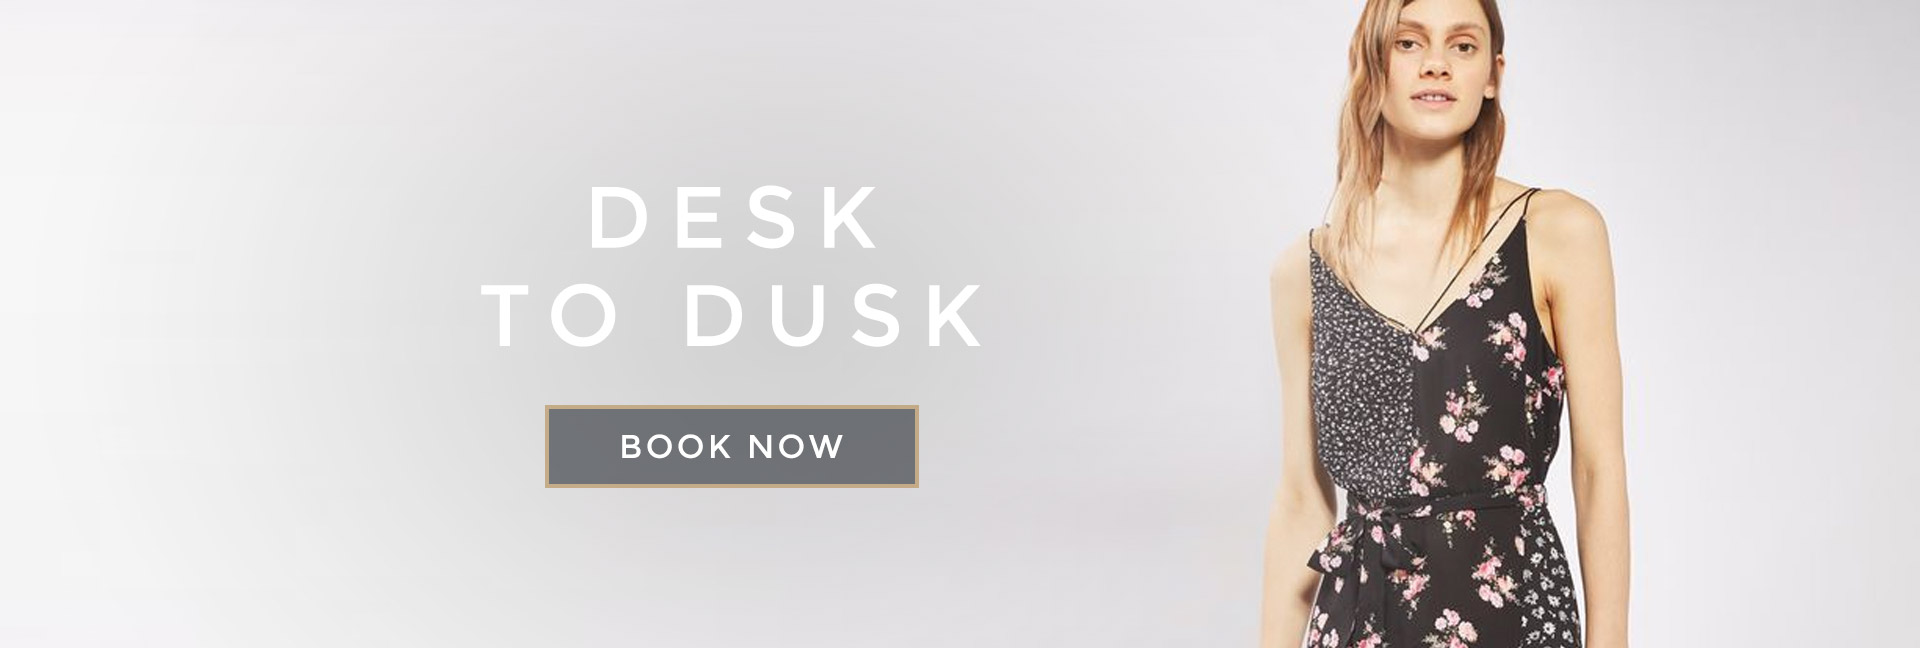 Desk to Dusk at All Bar One George St Edinburgh - Book your table